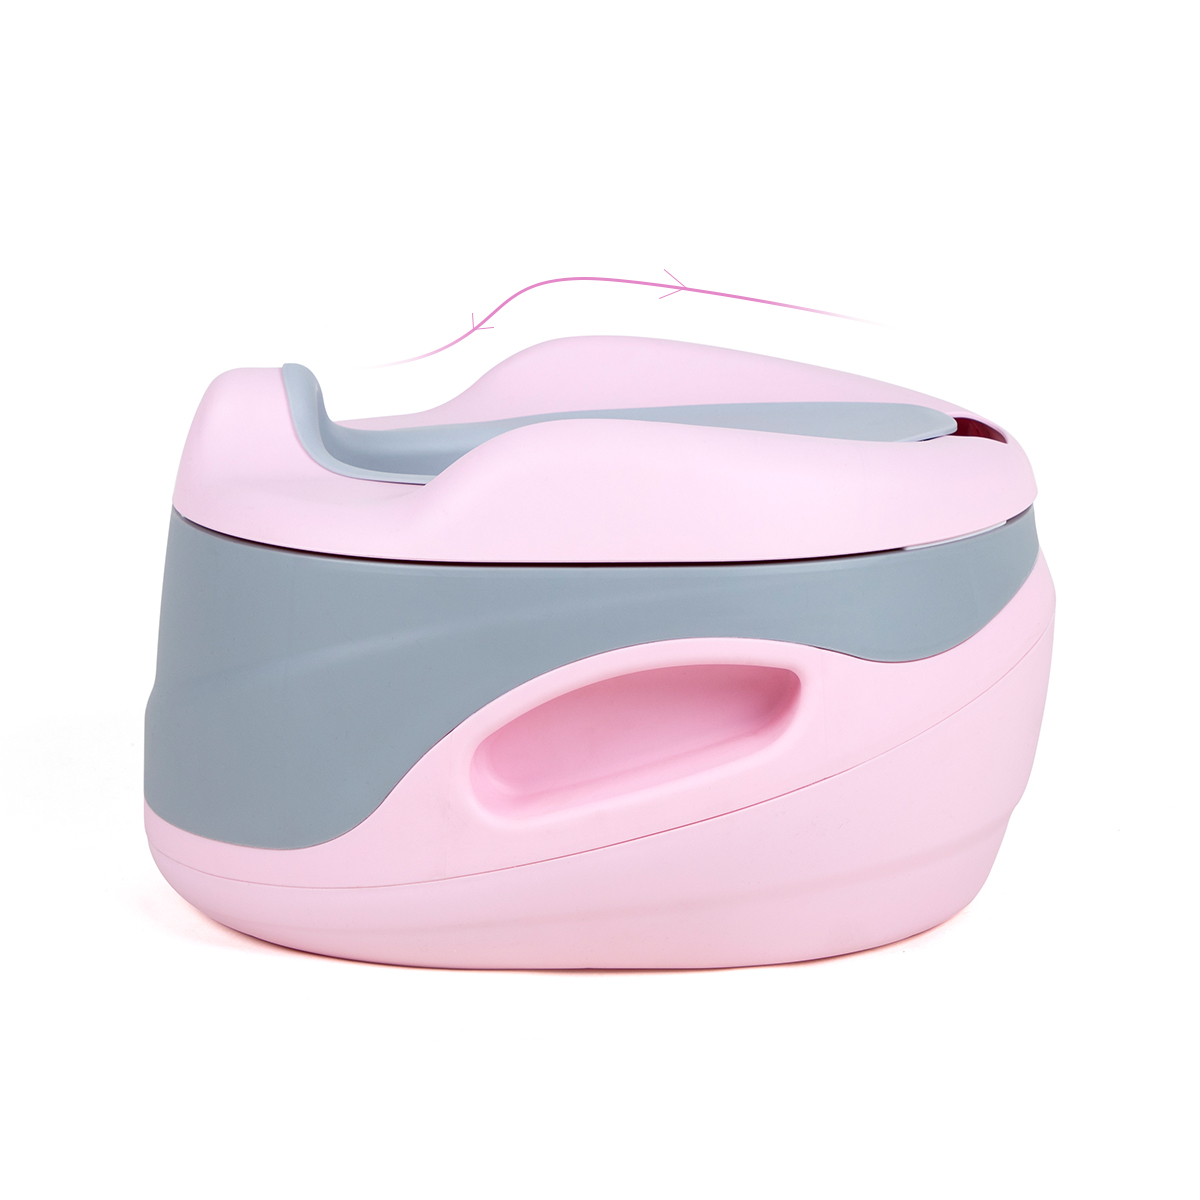 - Buy 3-in-1 Baby Potty Training Seat for Girls and Boys Potty Training